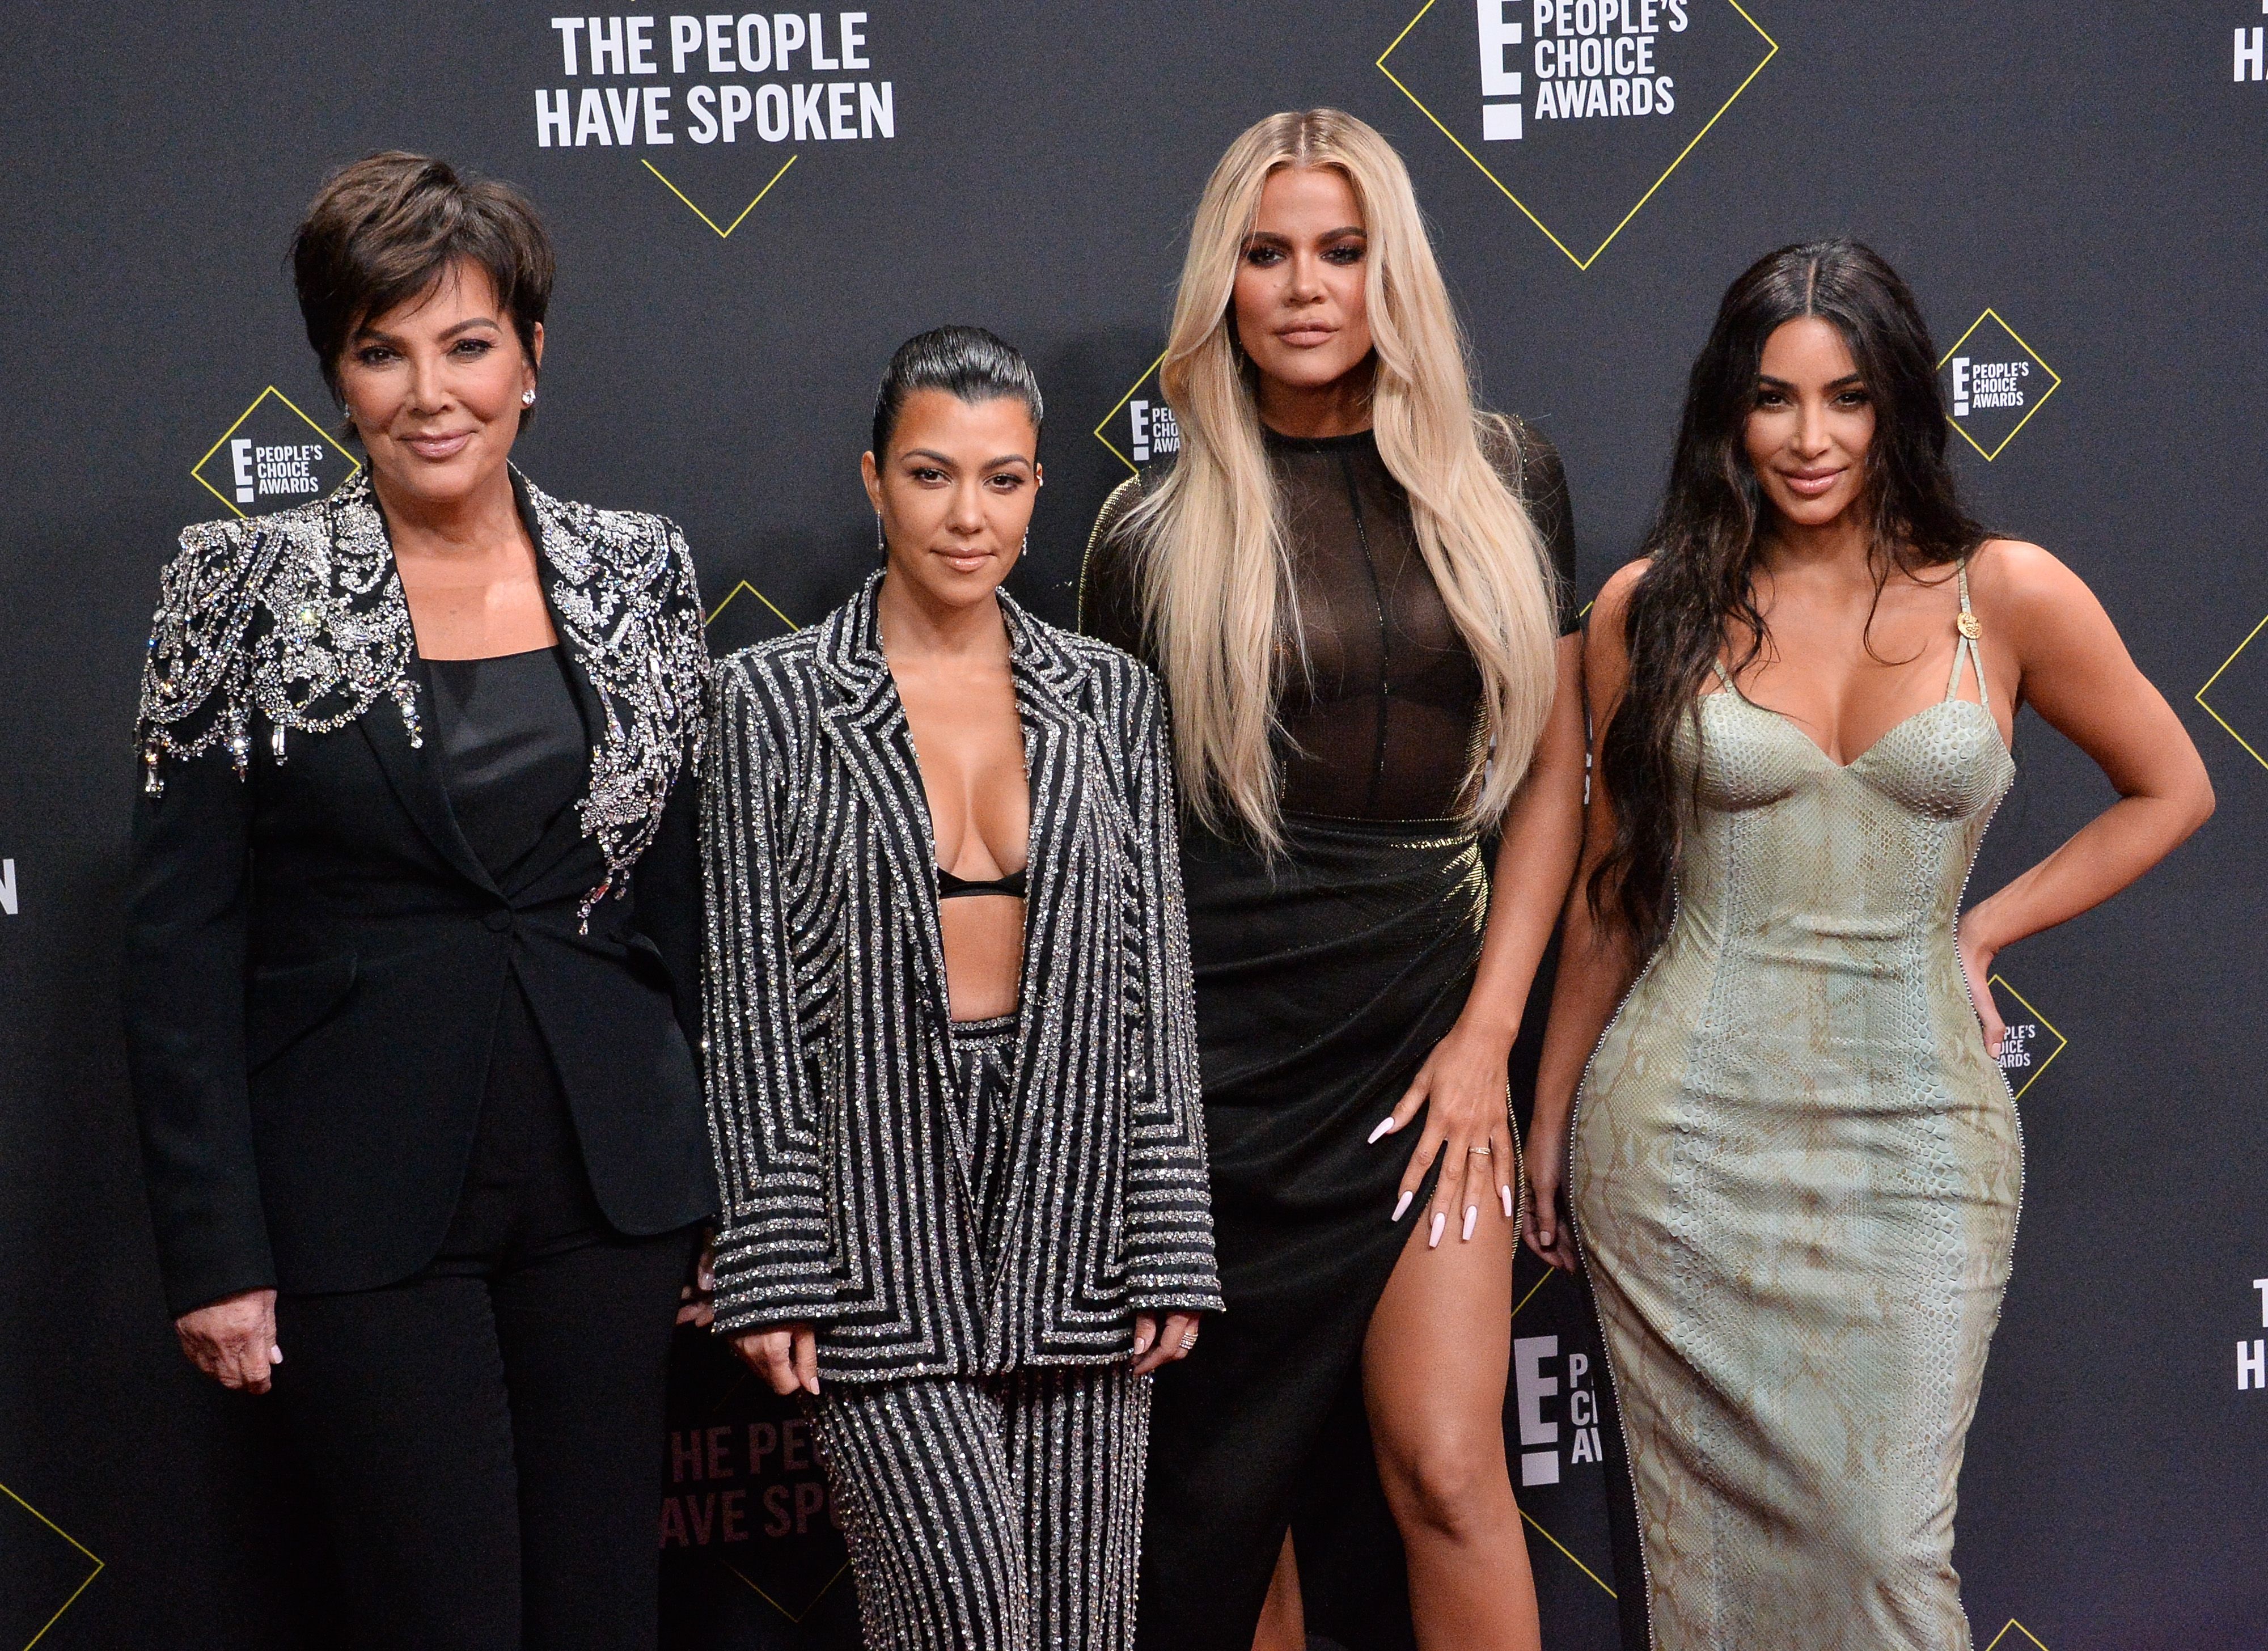 Kardashians Quotes About Having Sex NSFW Confessions